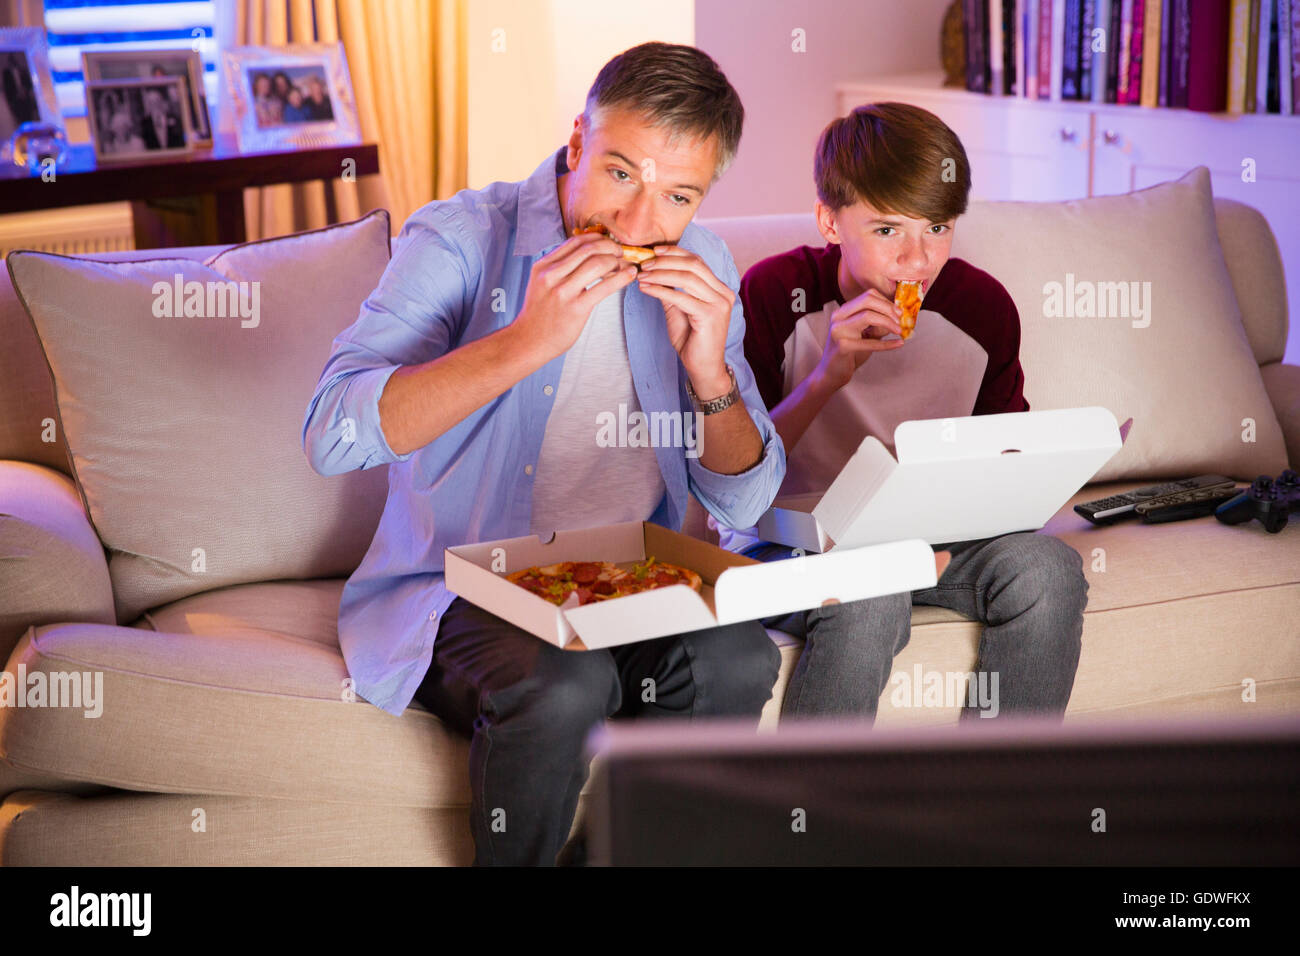 Father and son eating pizza and watching TV in living room Stock Photo